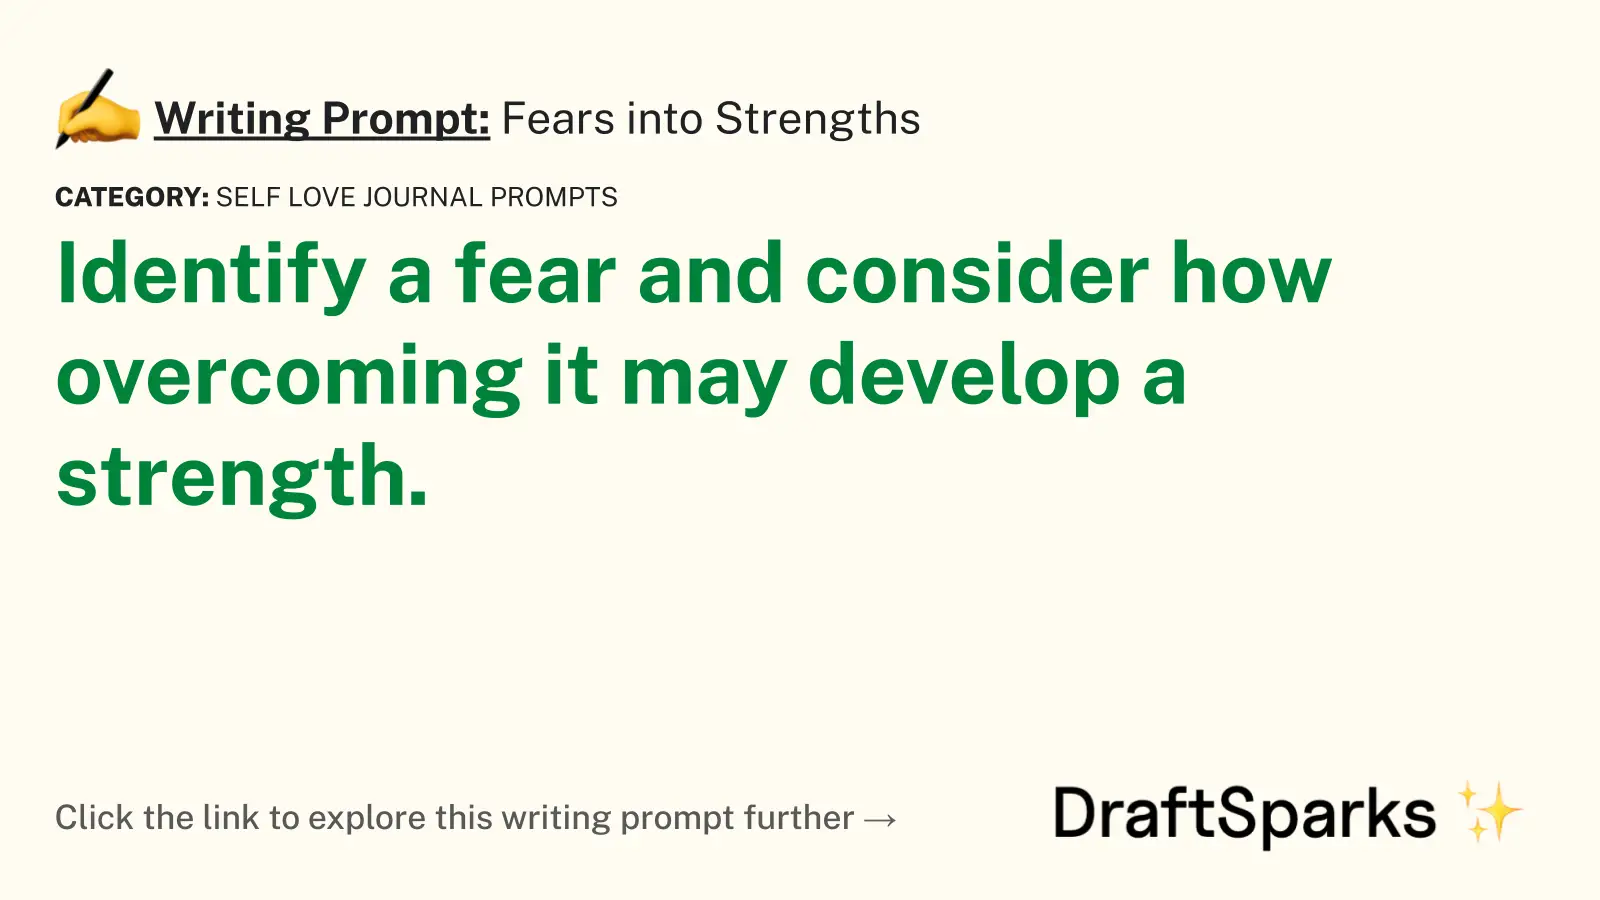 Fears into Strengths